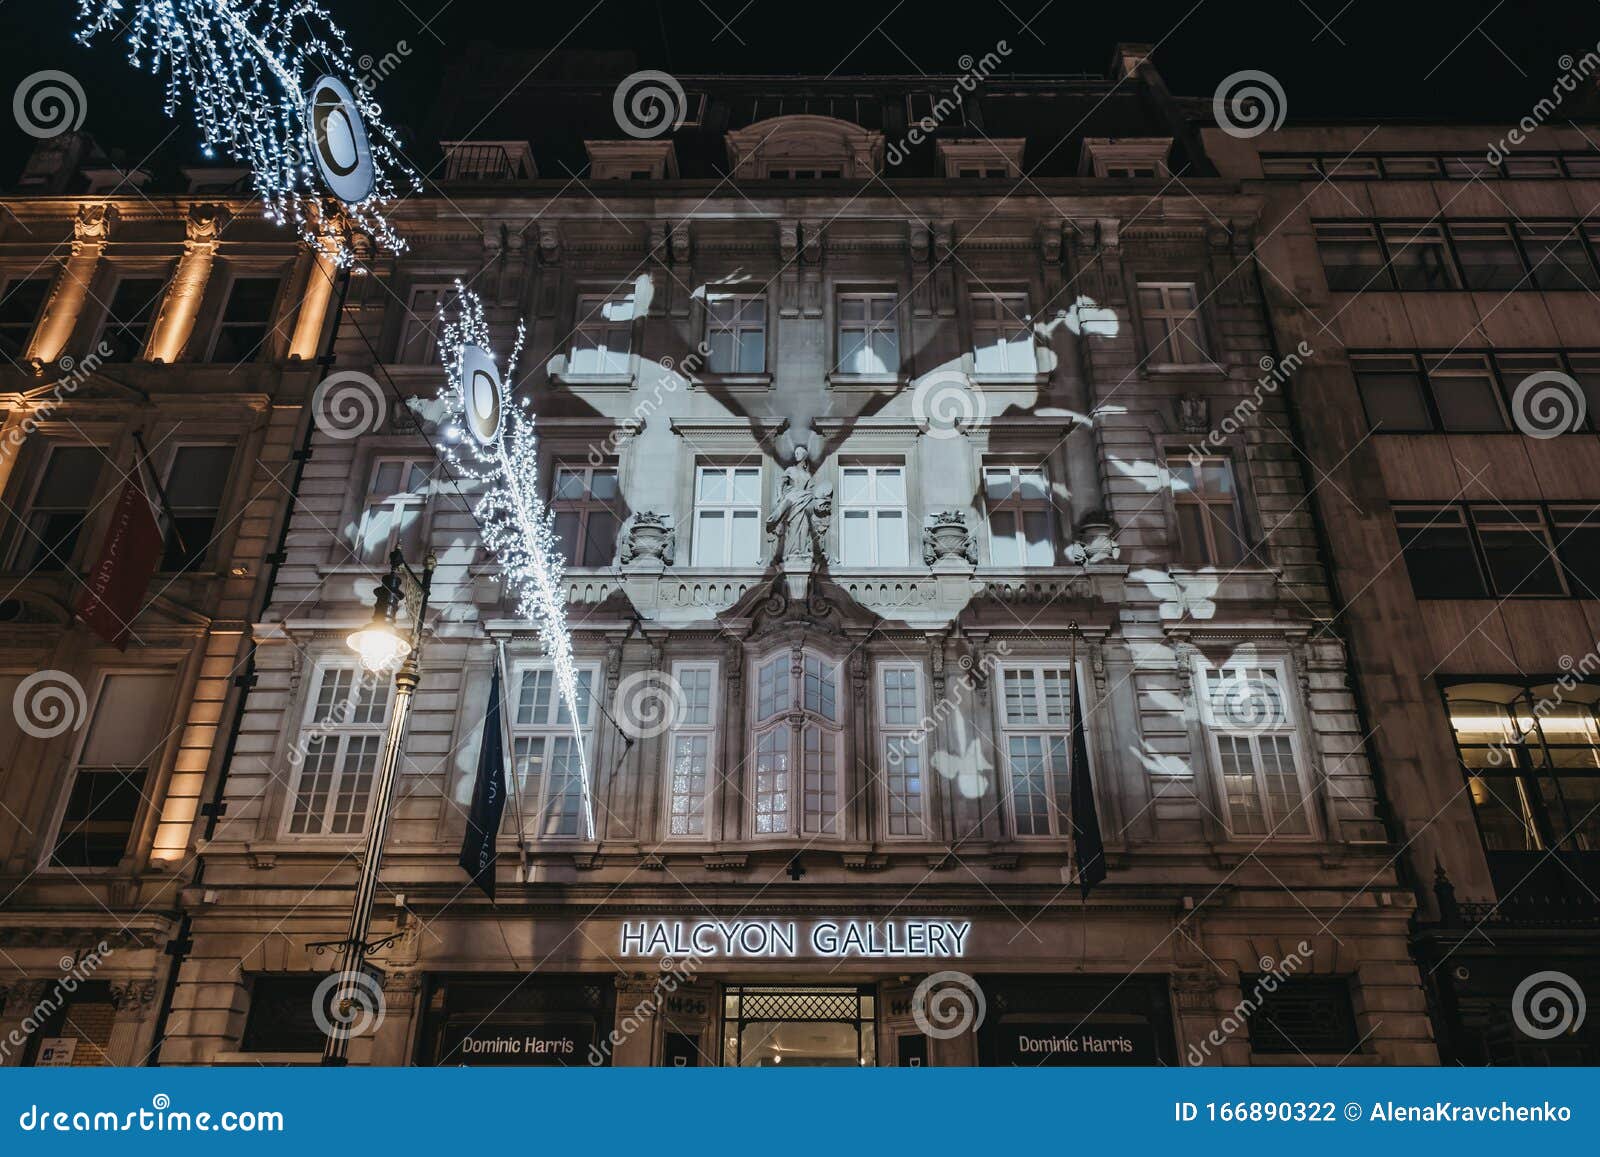 Butterfly Light Show By Dominic Harris On Facade Of The Halcyon Gallery ...